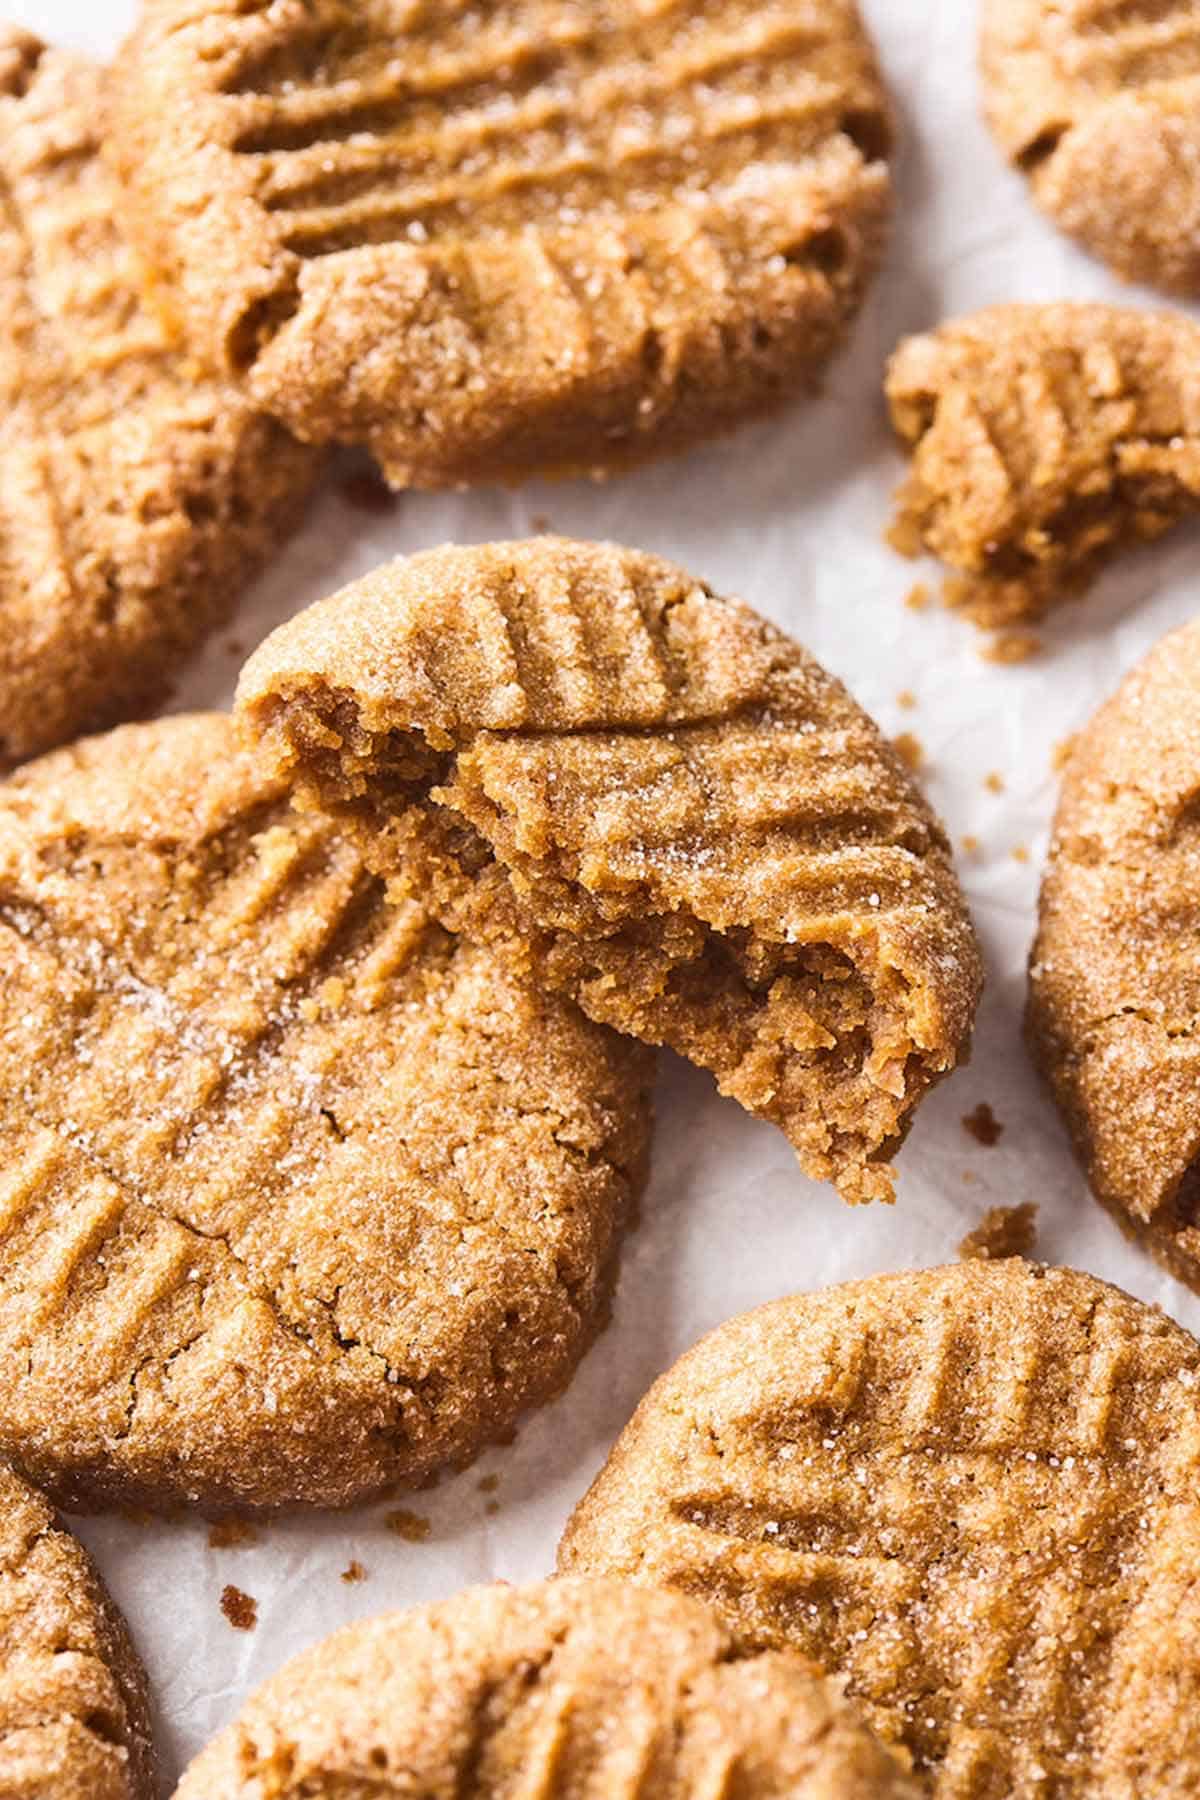 A close up of peanut butter cookies after being baked on a baking pan.